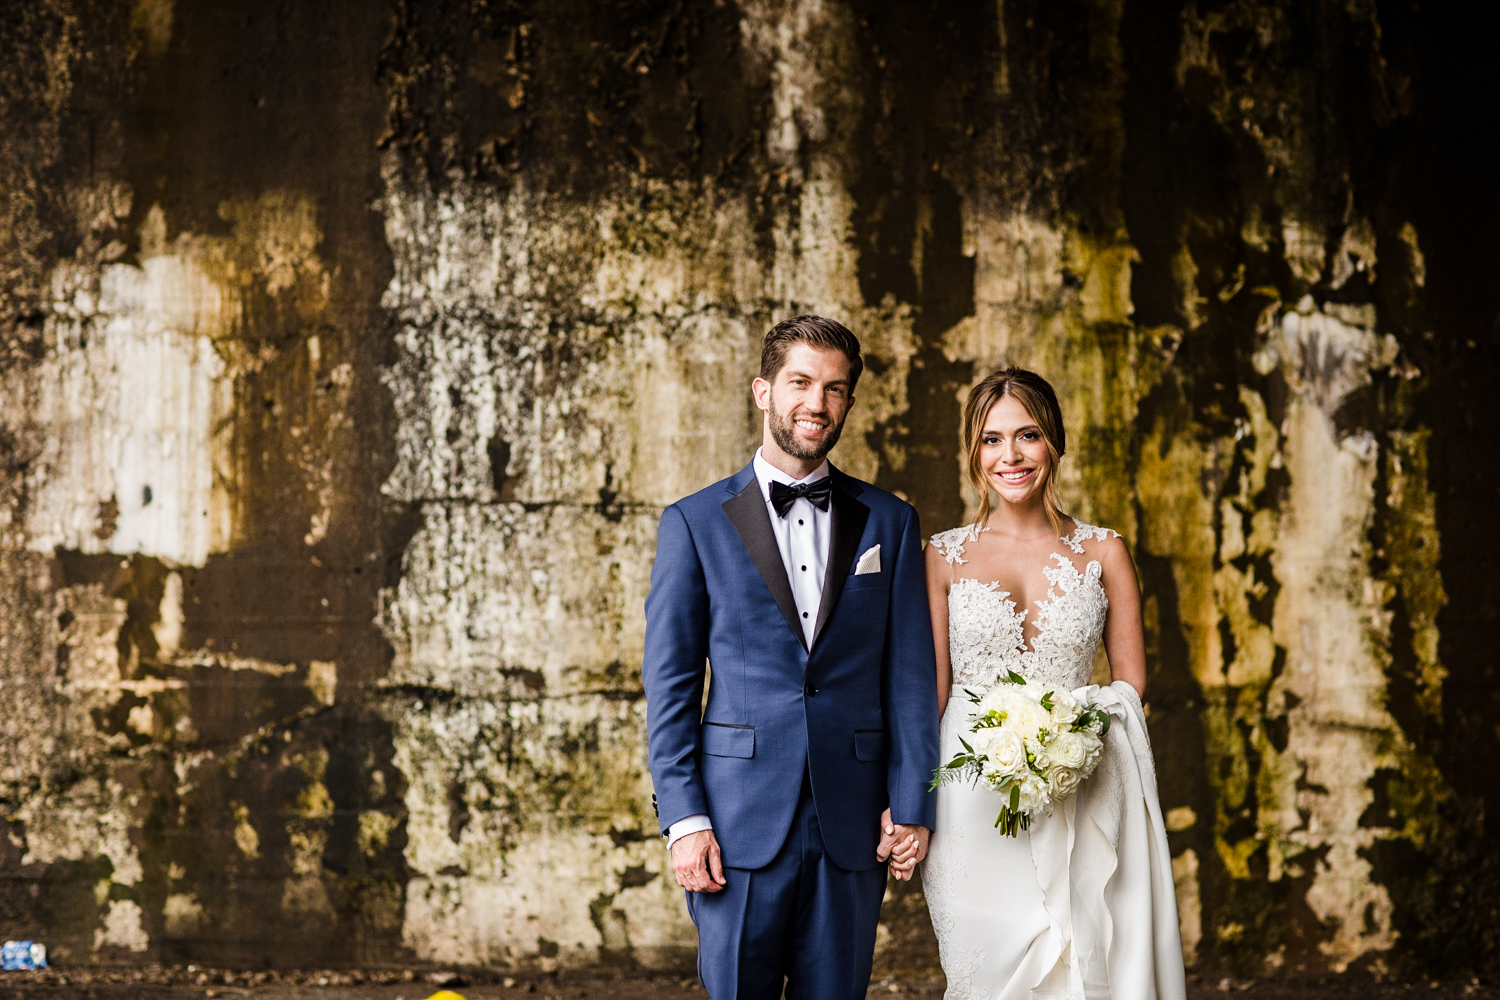 A bride and groom pose for a portrait before their Gallery Marchetti wedding.